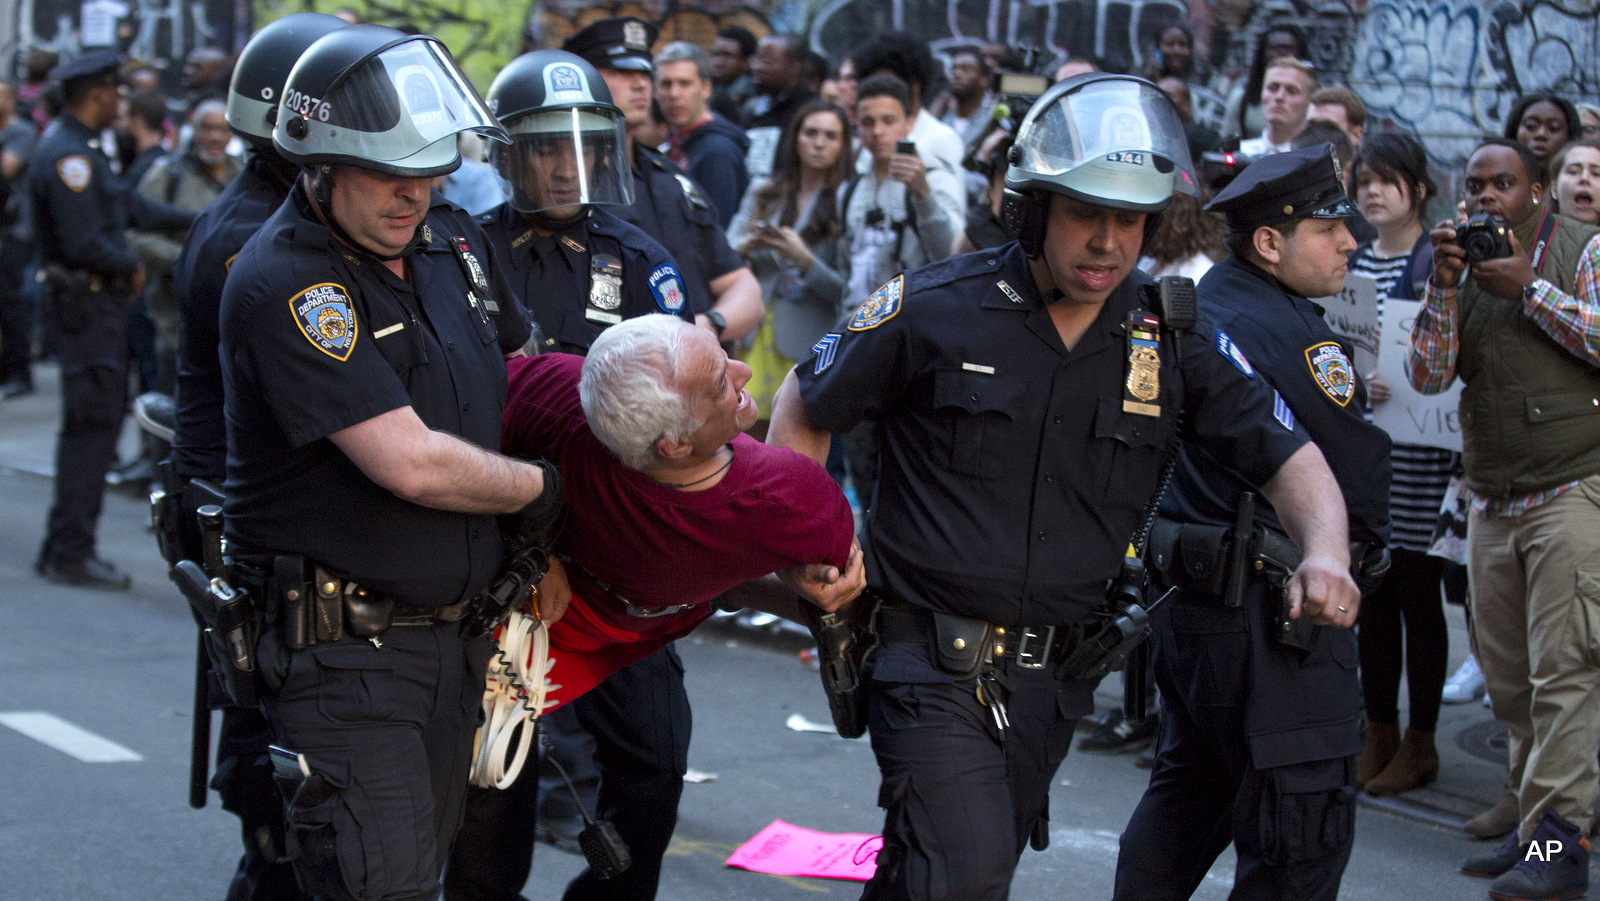 A man is carried by police officers as arrests are made near Union Square, Wednesday, April 29, 2015, in New York. People gathered to protest the death of Freddie Gray, a Baltimore man who was critically injured in police custody.